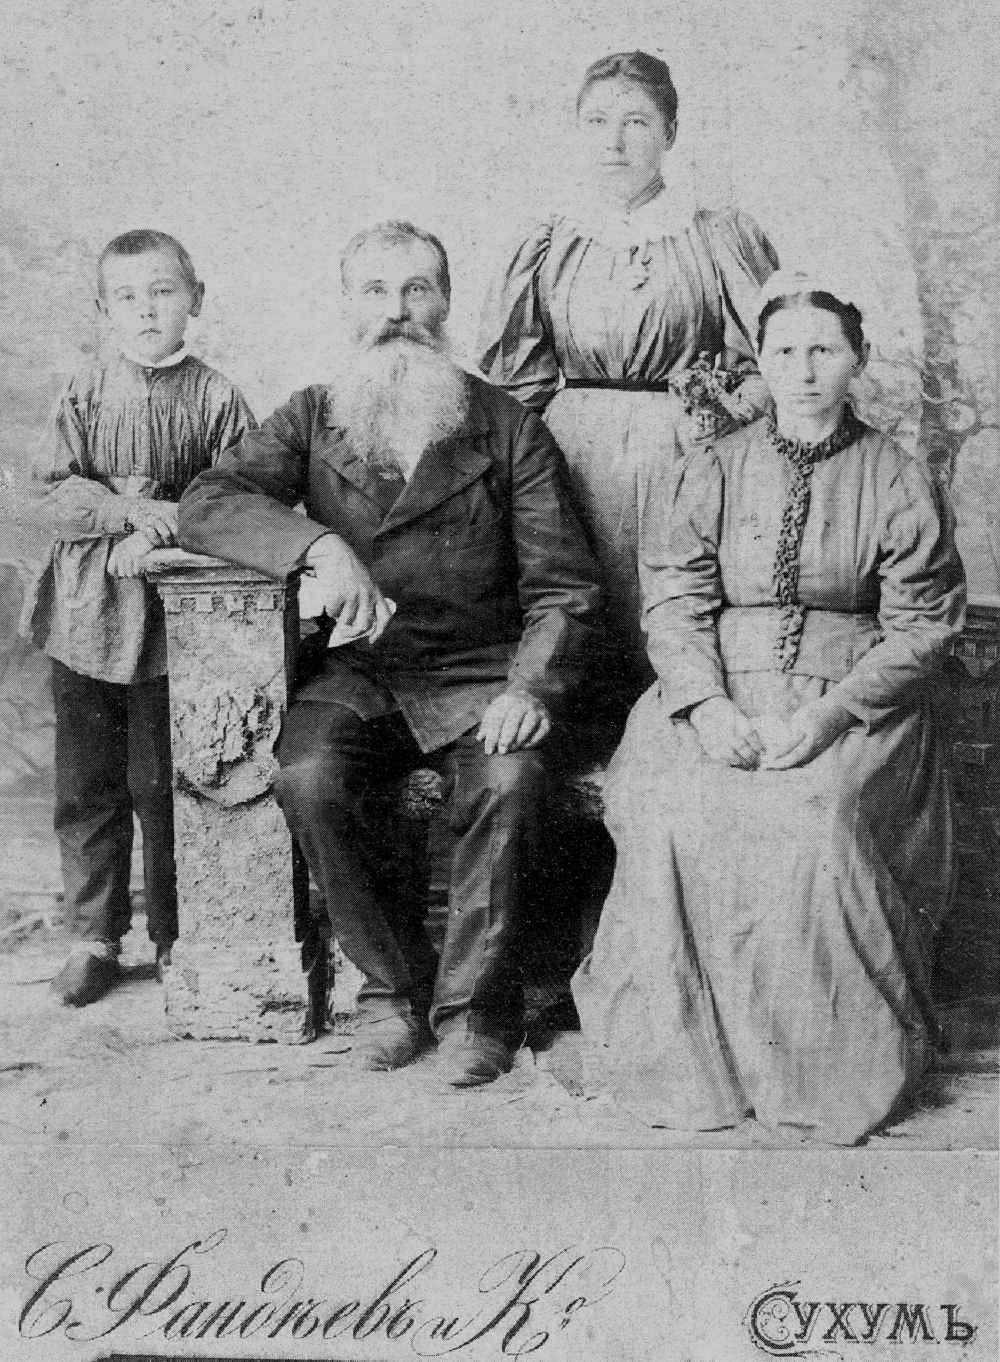 One of the first village elders, Peeter Pint, with his wife Mari and children Jakob and Liine. Photo by S.S. Fandeiev, 1899.